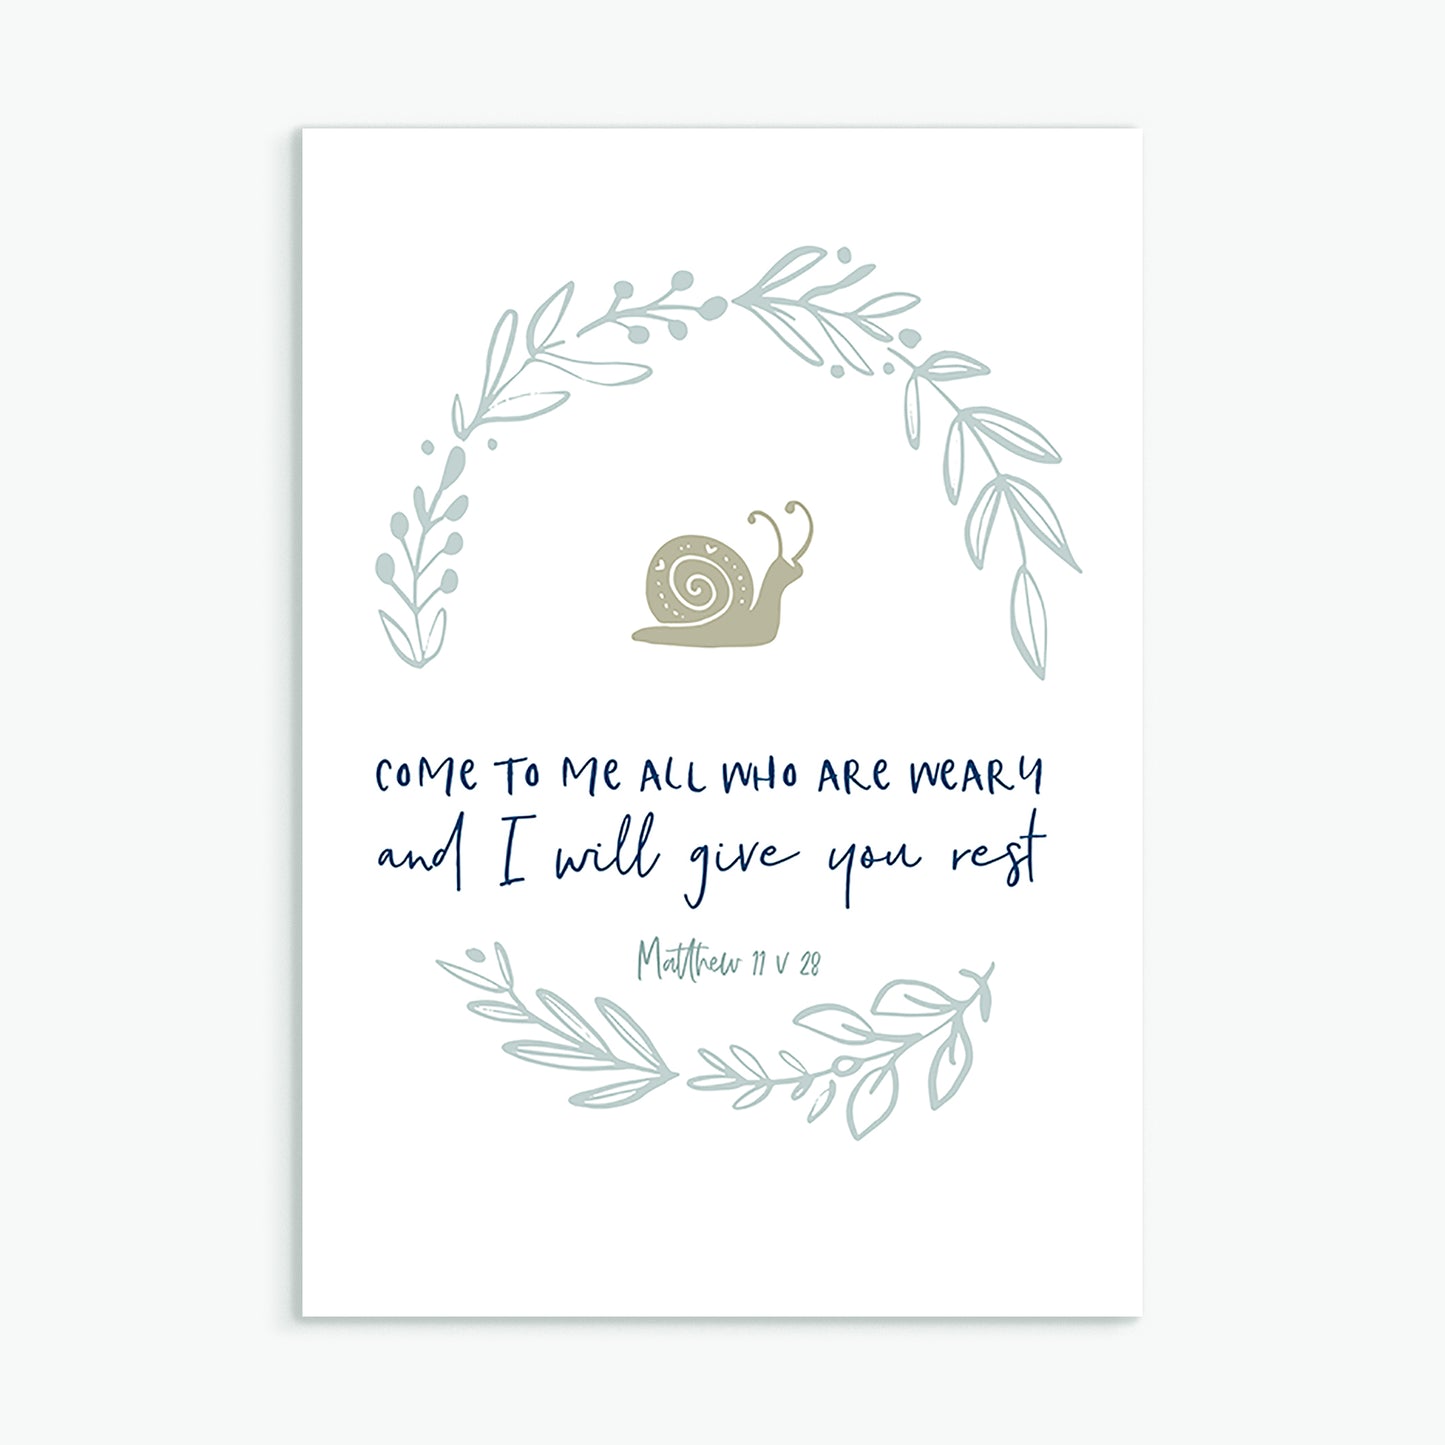 Come to me greeting card